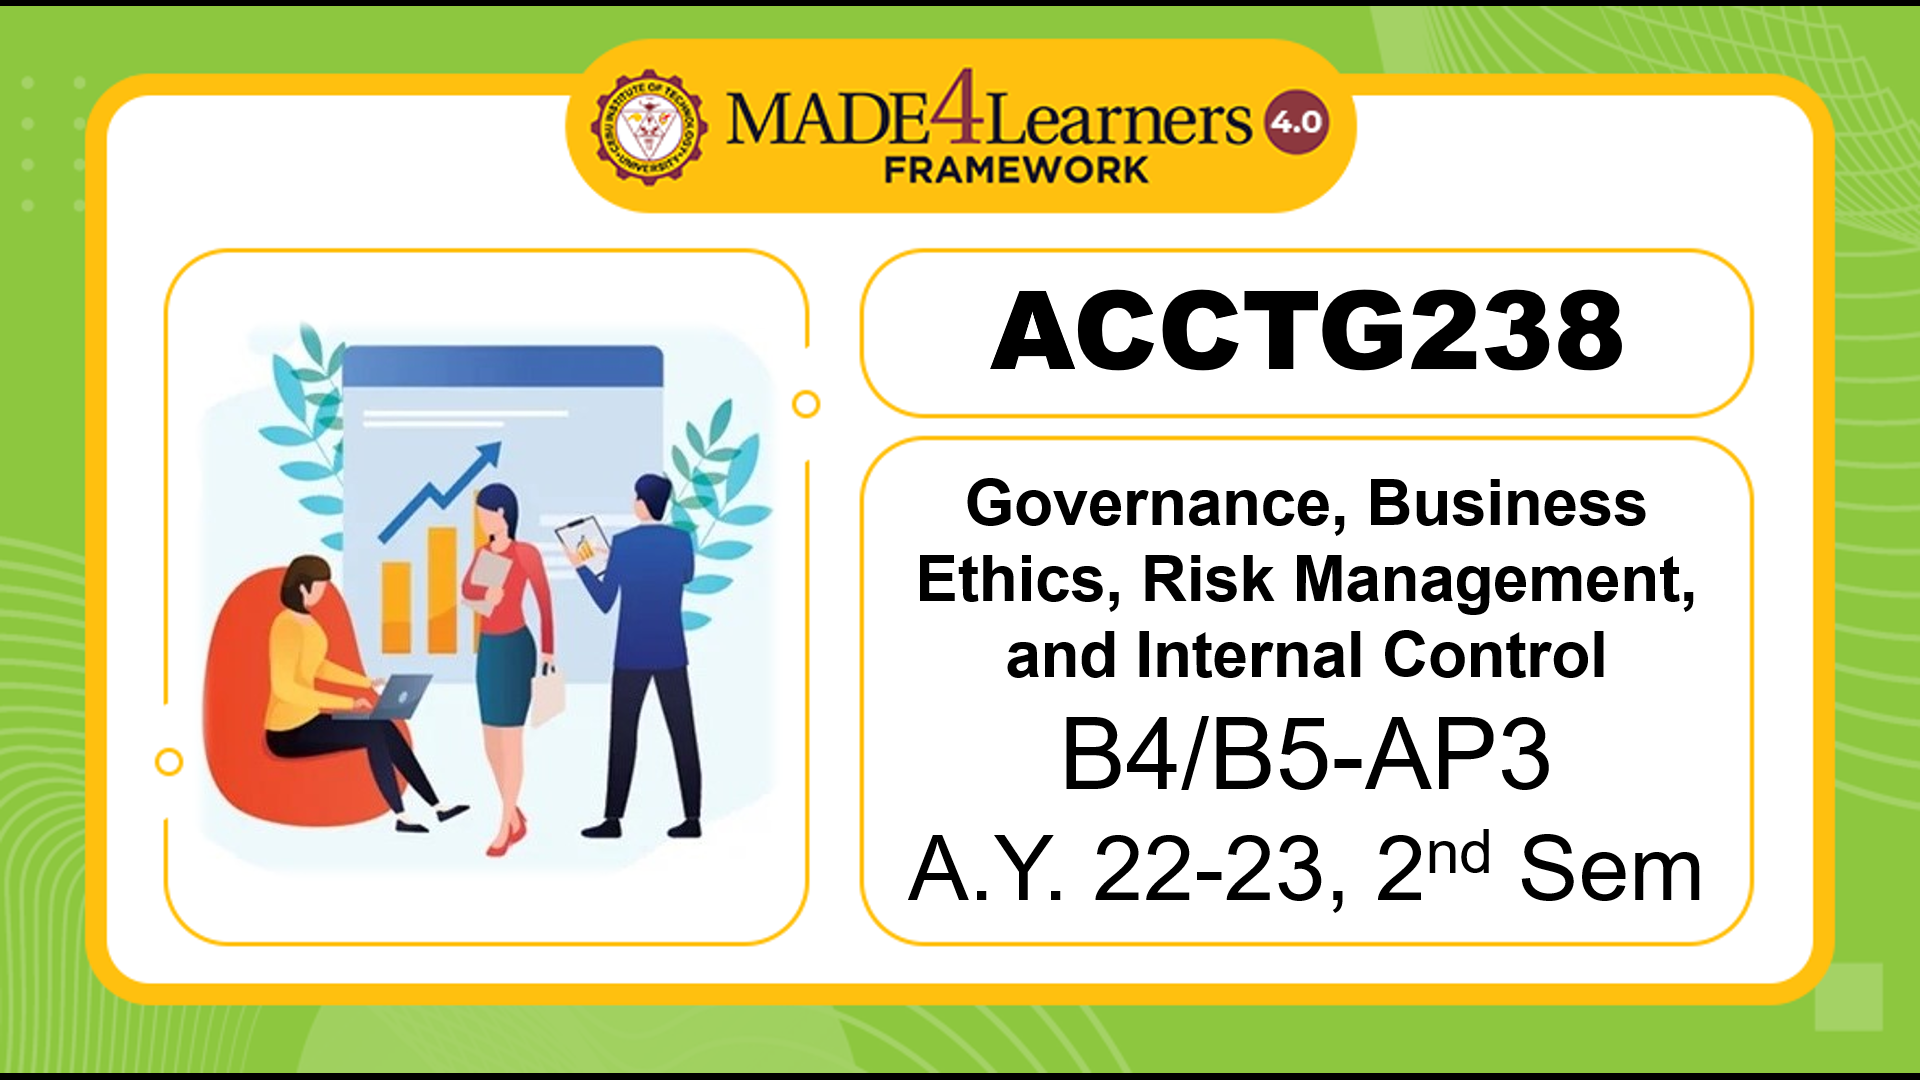 ACCTG238 Governance, Business Ethics, Risk Management, and Internal Control